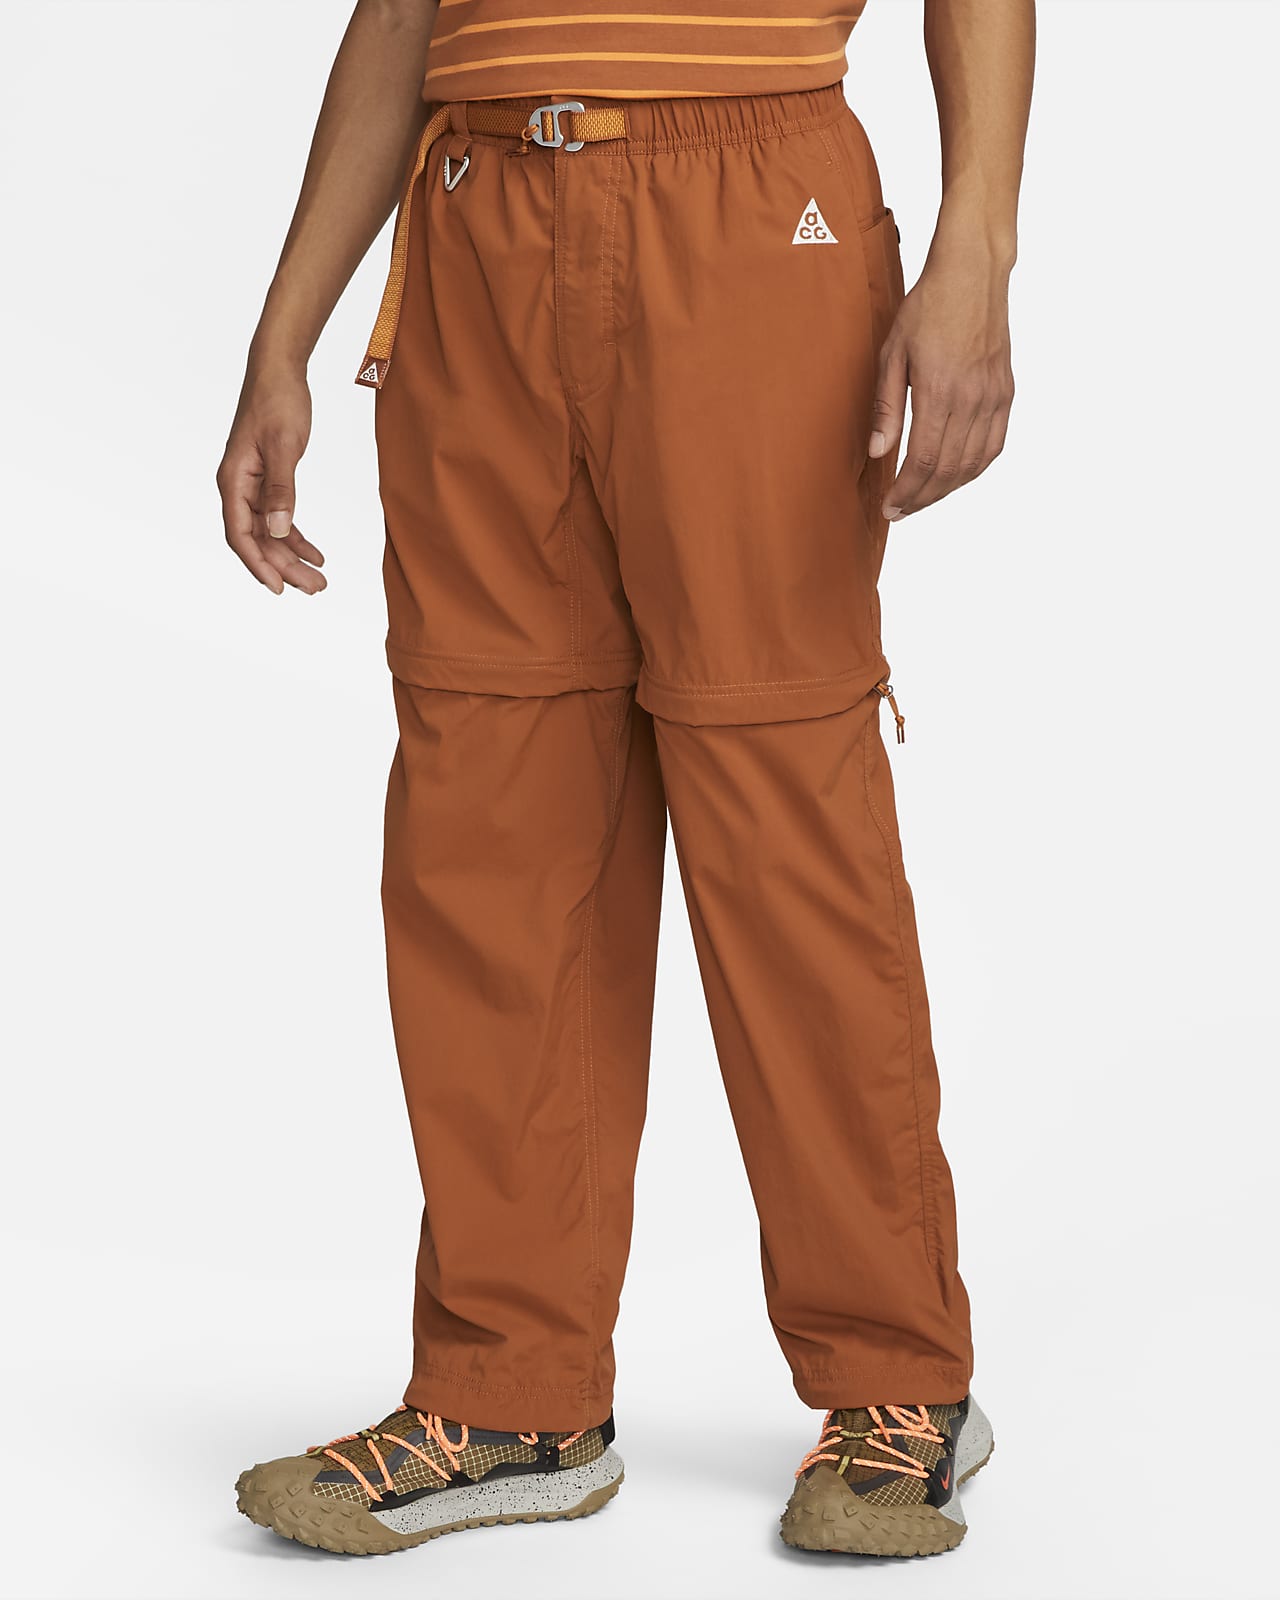 Men's Side-Zip Sweat Pants Adaptive Clothing for Seniors, Disabled &  Elderly Care